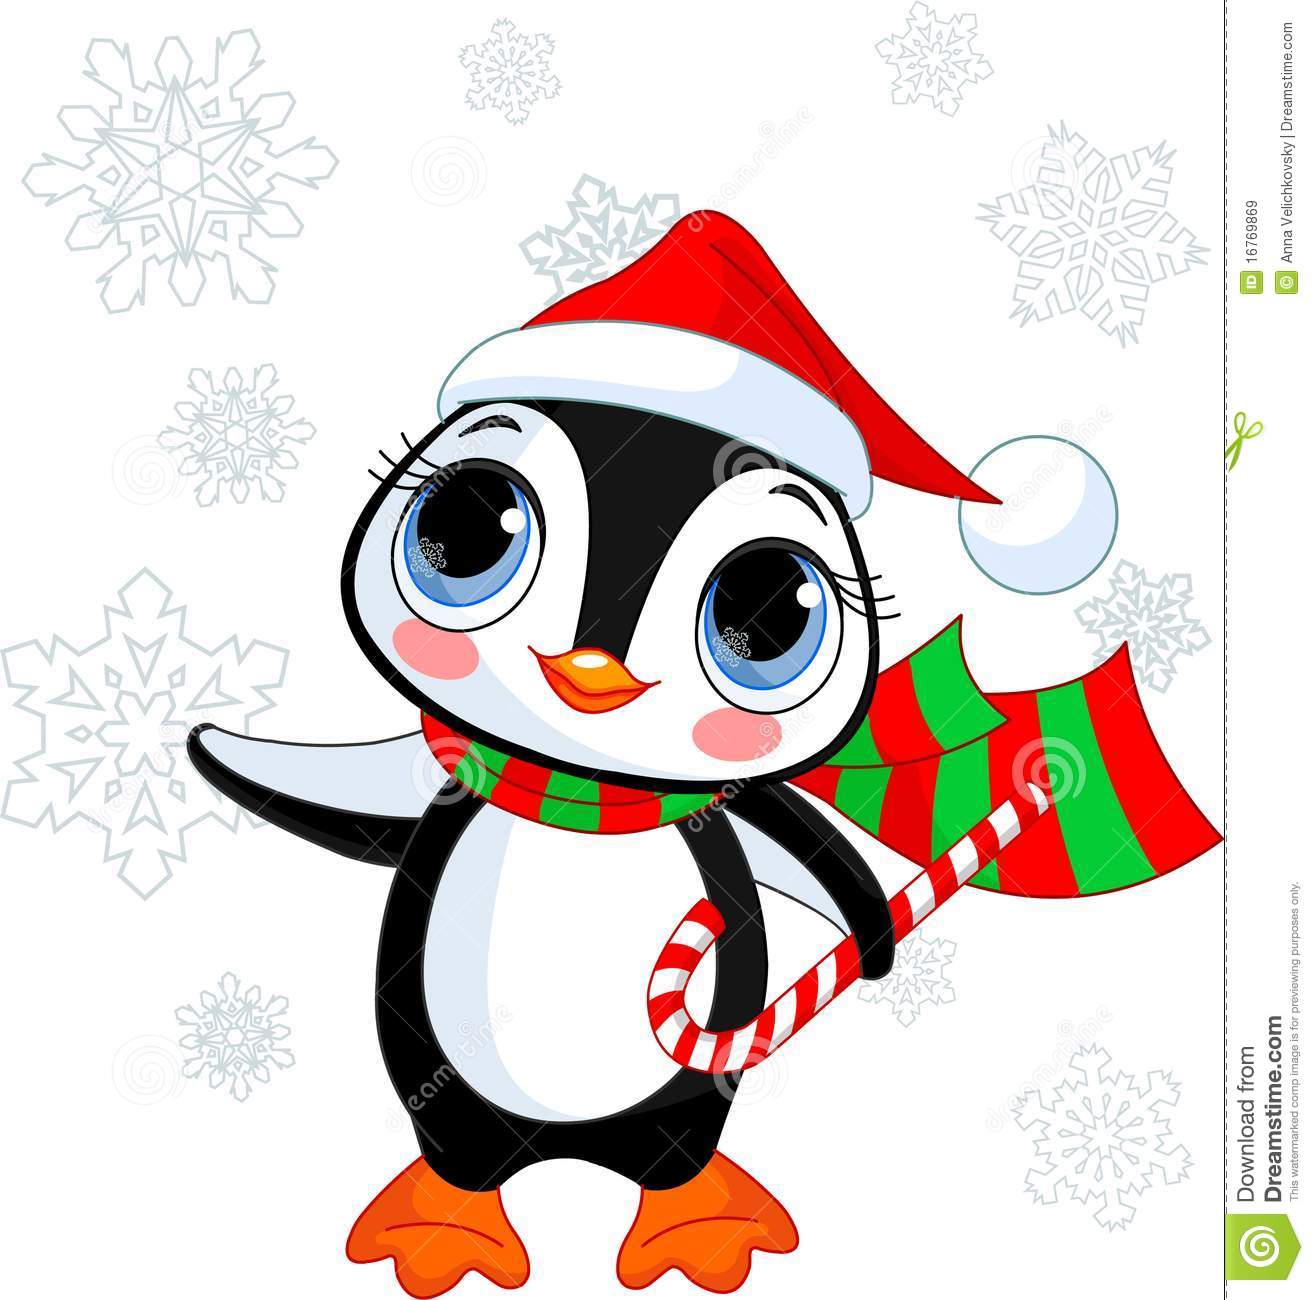 Cute Christmas Penguin Royalty Free Stock Images   Image  16769869